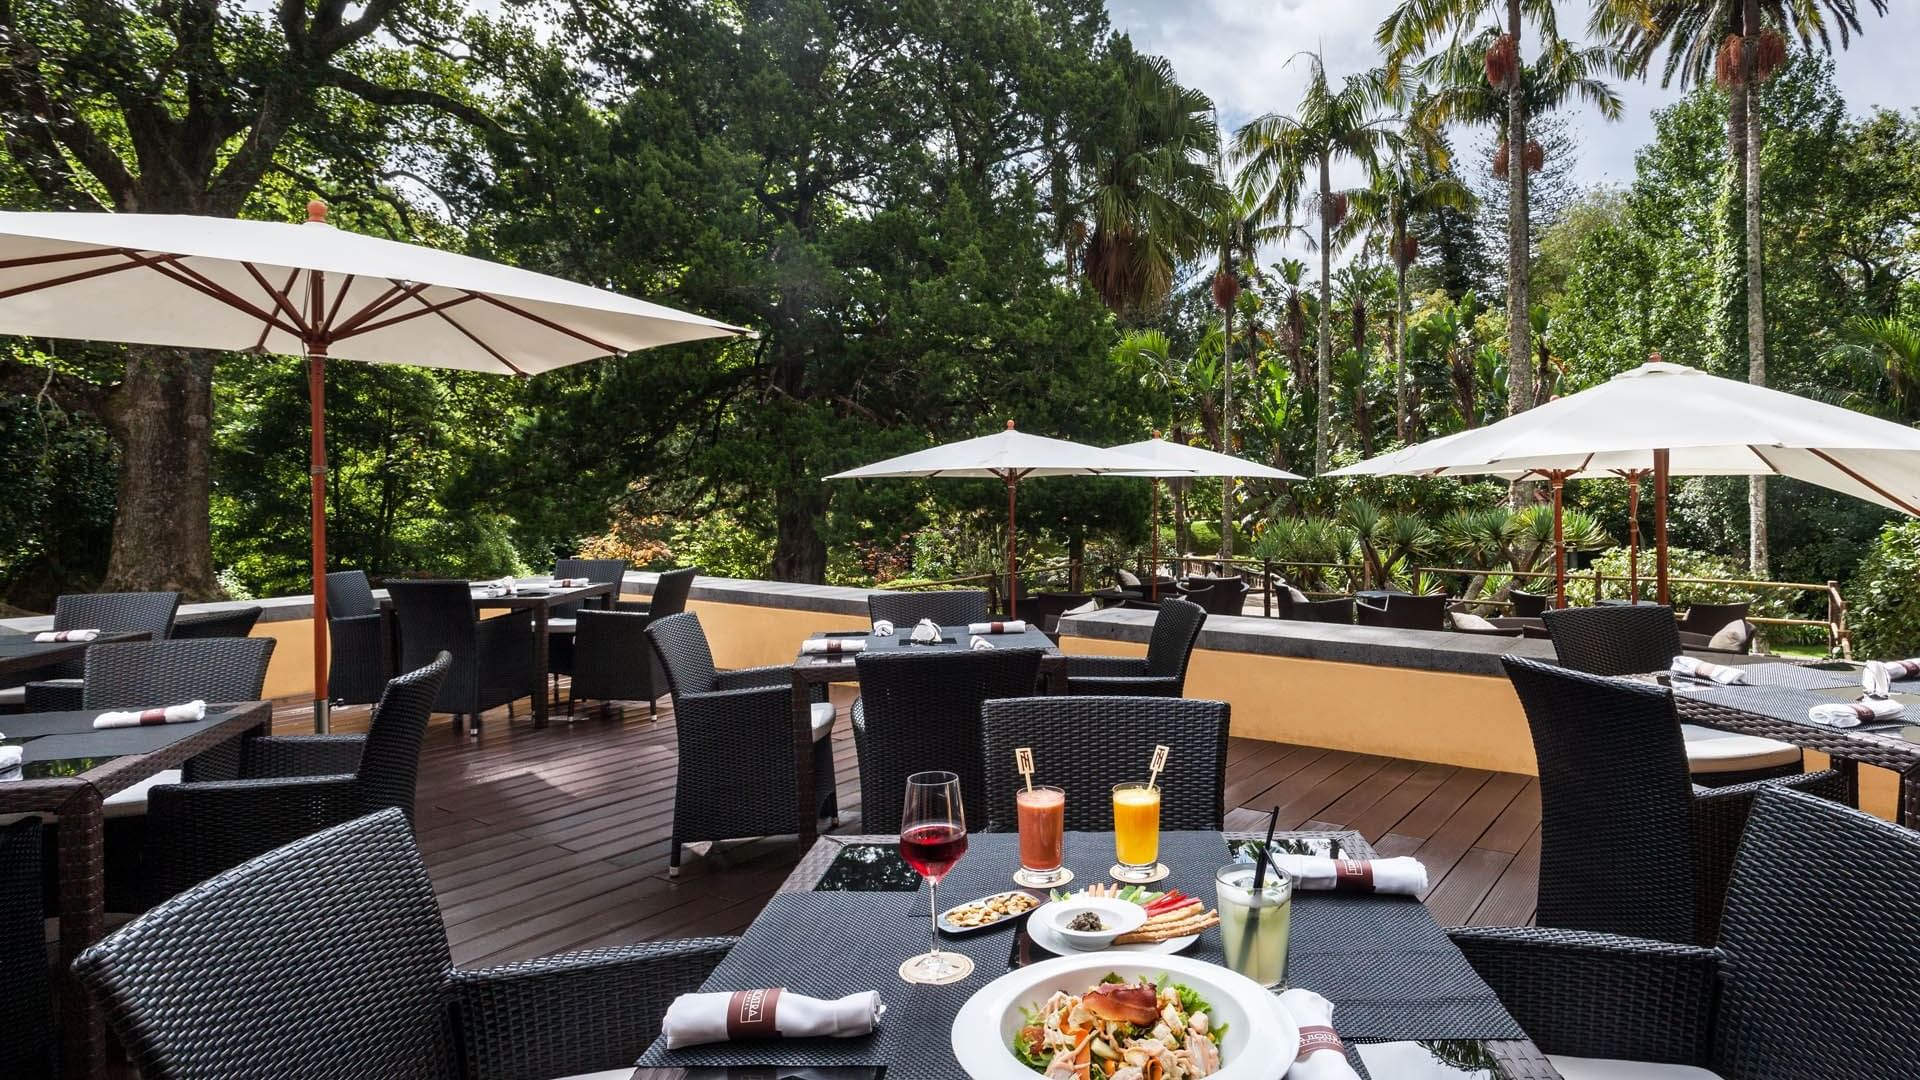 Meals served on a table in The Gardener's outdoor dining area at Terra Nostra Garden Hotel